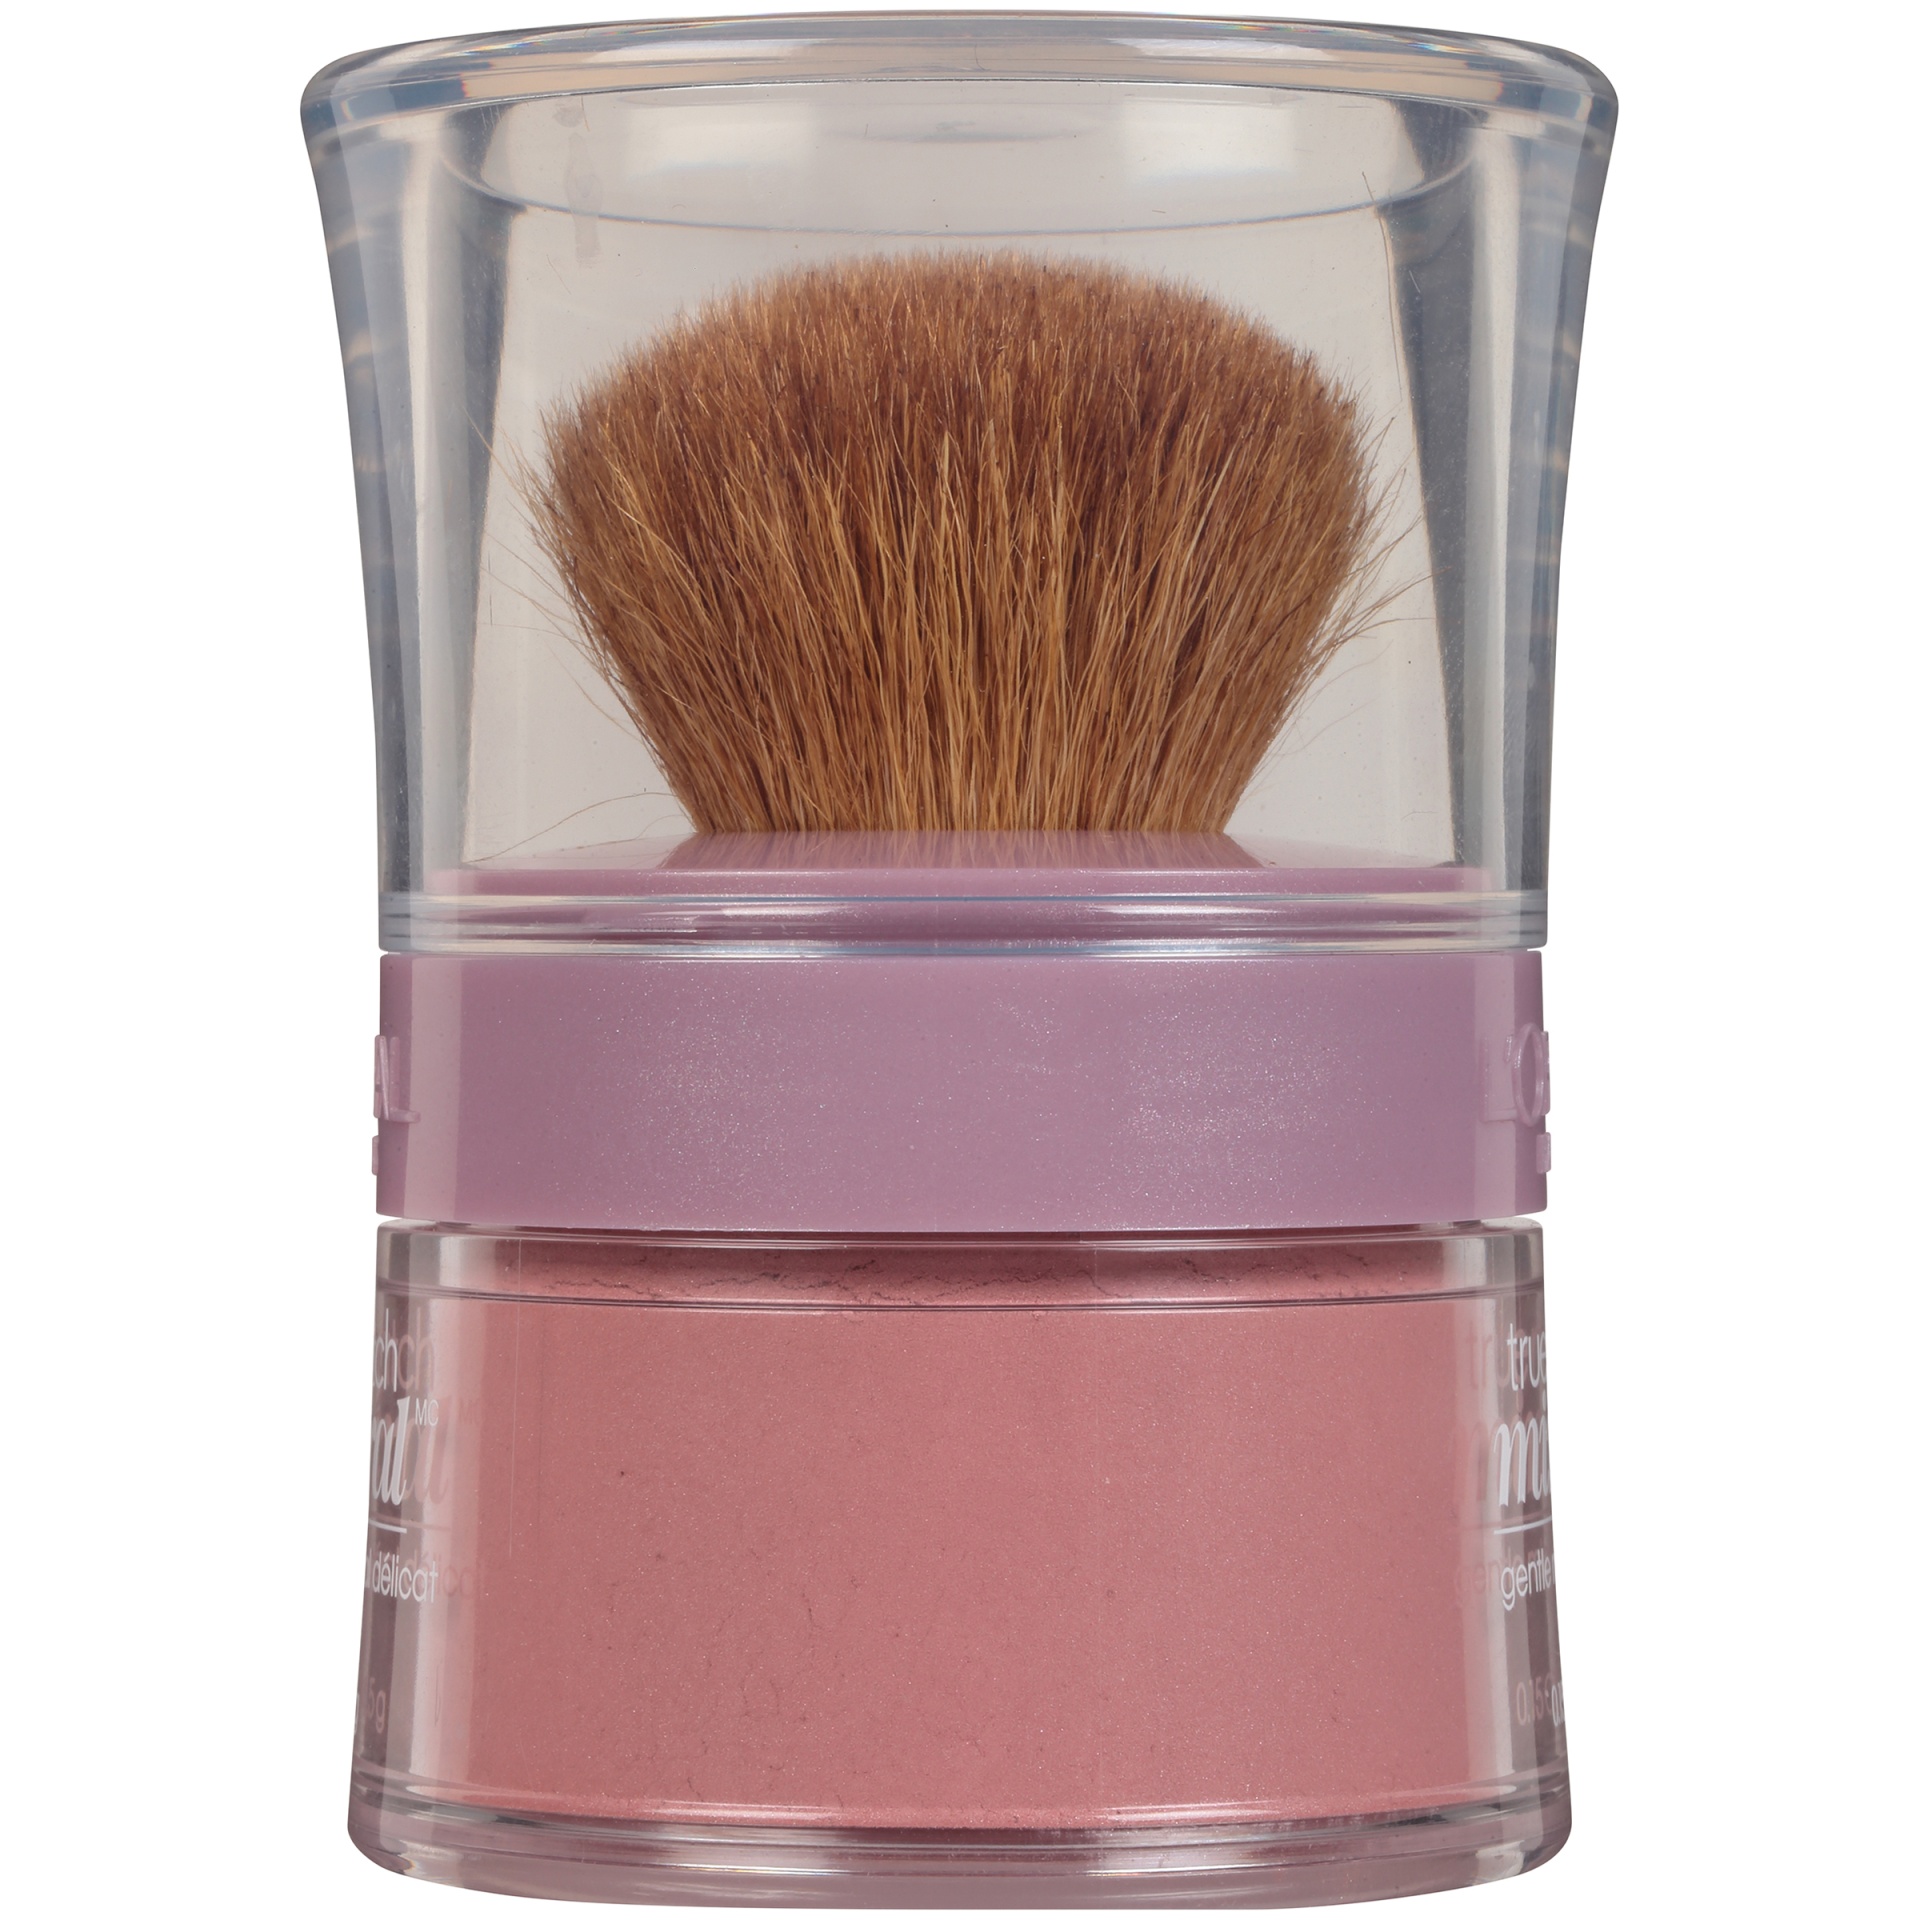 slide 4 of 6, L'Oreal True Match Gentle Mineral Blush - 486 Pinched Pink, 0.15 oz